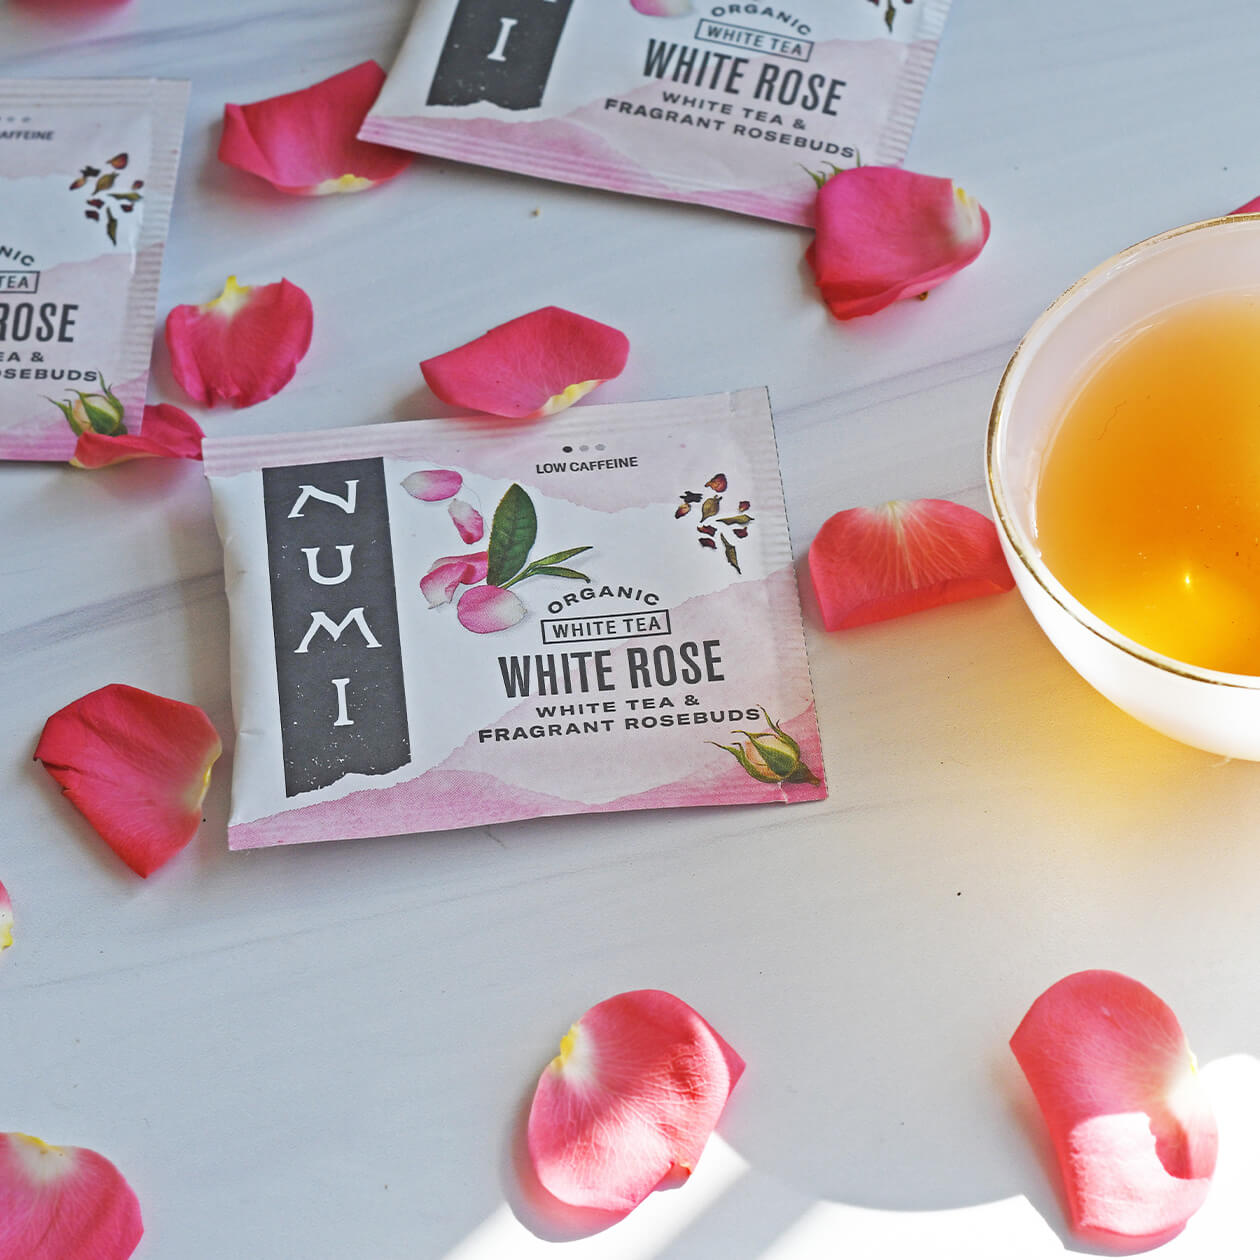 Numi White Rose tea bags with rose petals and a brewed cup of tea on a countertop